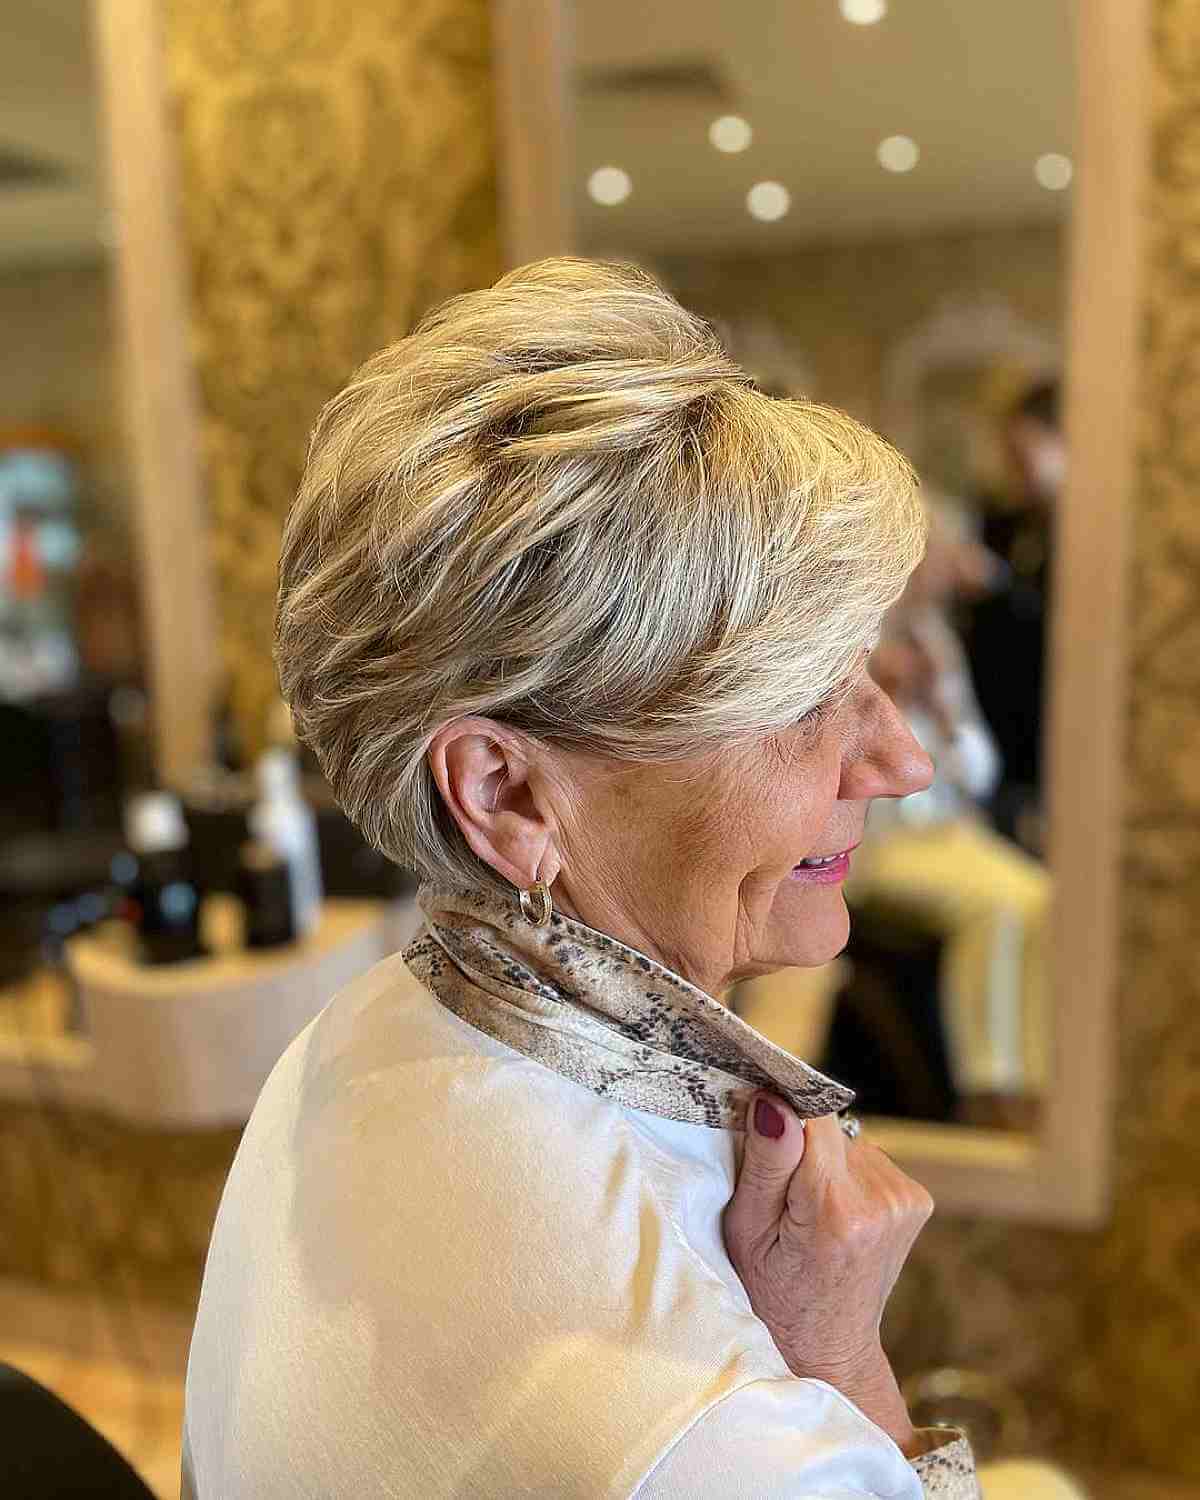 Feminine Short Long Blonde Pixie with Shorter Layers for Women in Their 60s